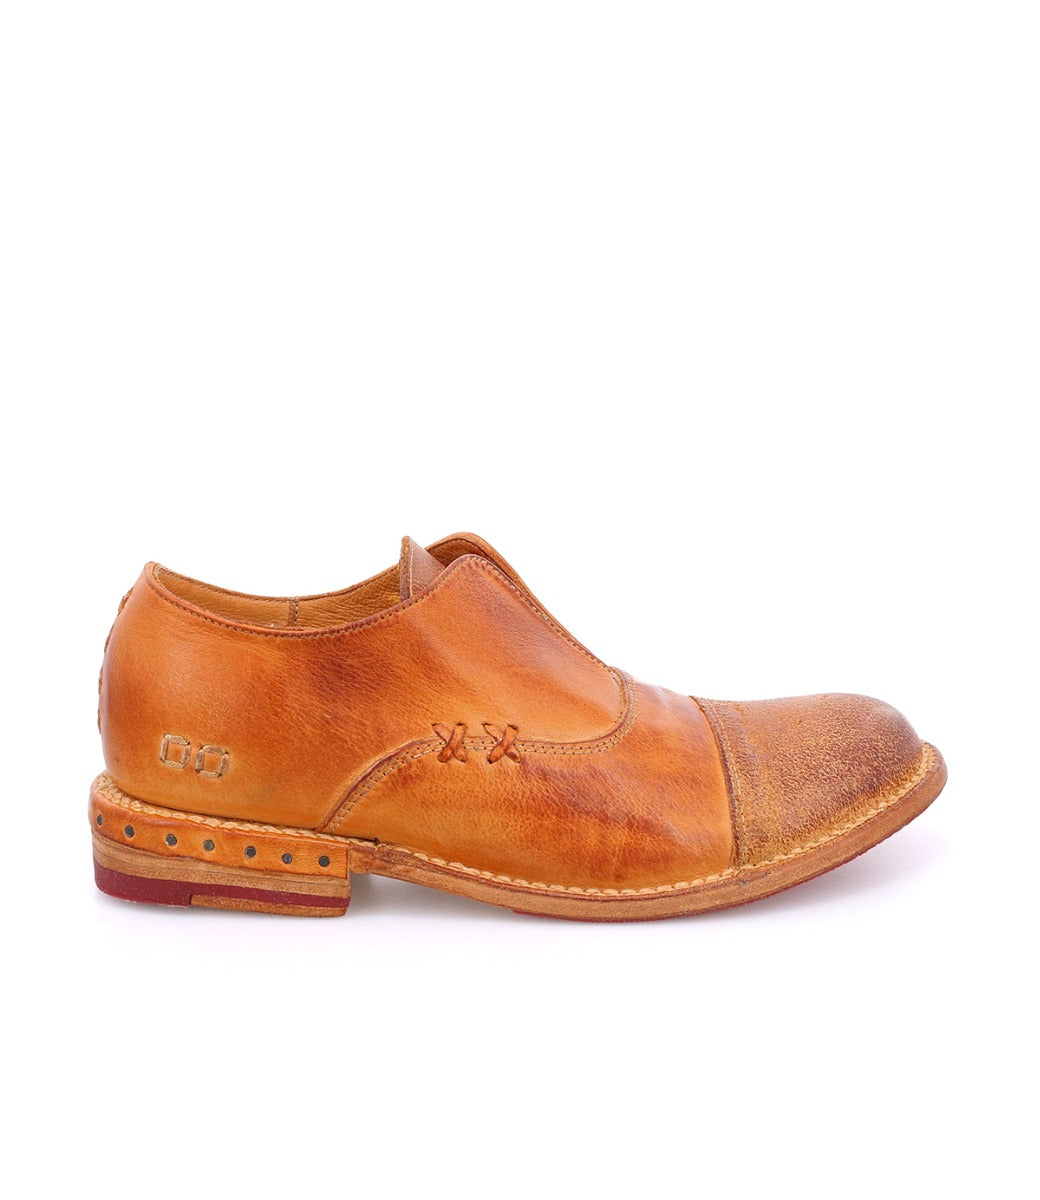 A men's brown leather Rose shoe with a tan sole by Bed Stu.